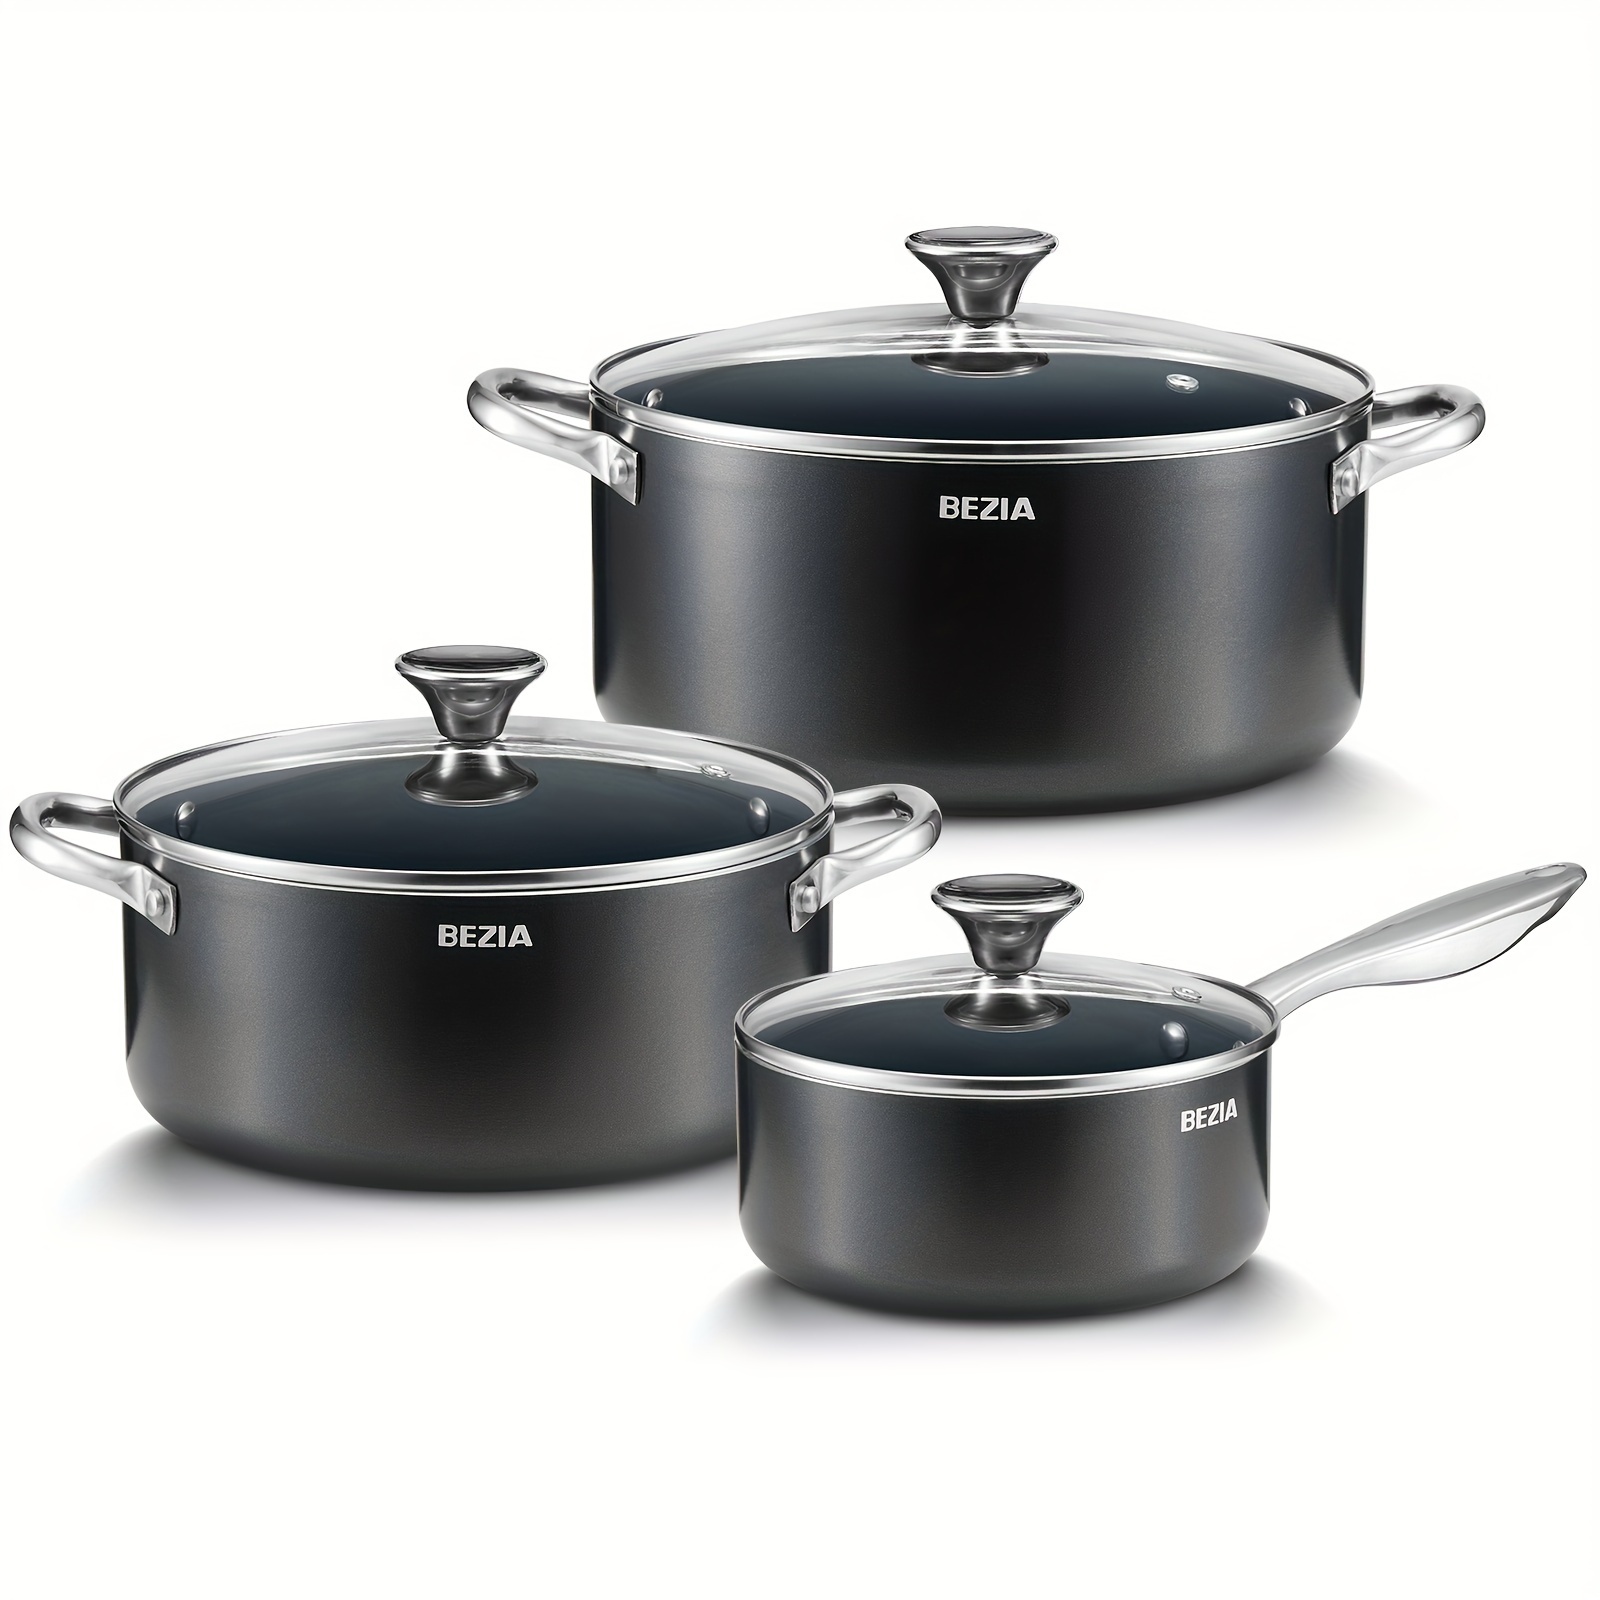 

Induction Cookware Set 6-piece, Pots And Pans Set With Non-stick Ceramic Coating, Stainless Steel Handles & Lids, Dishwasher Safe & Oven Safe, Compatible With All Stoves, Black